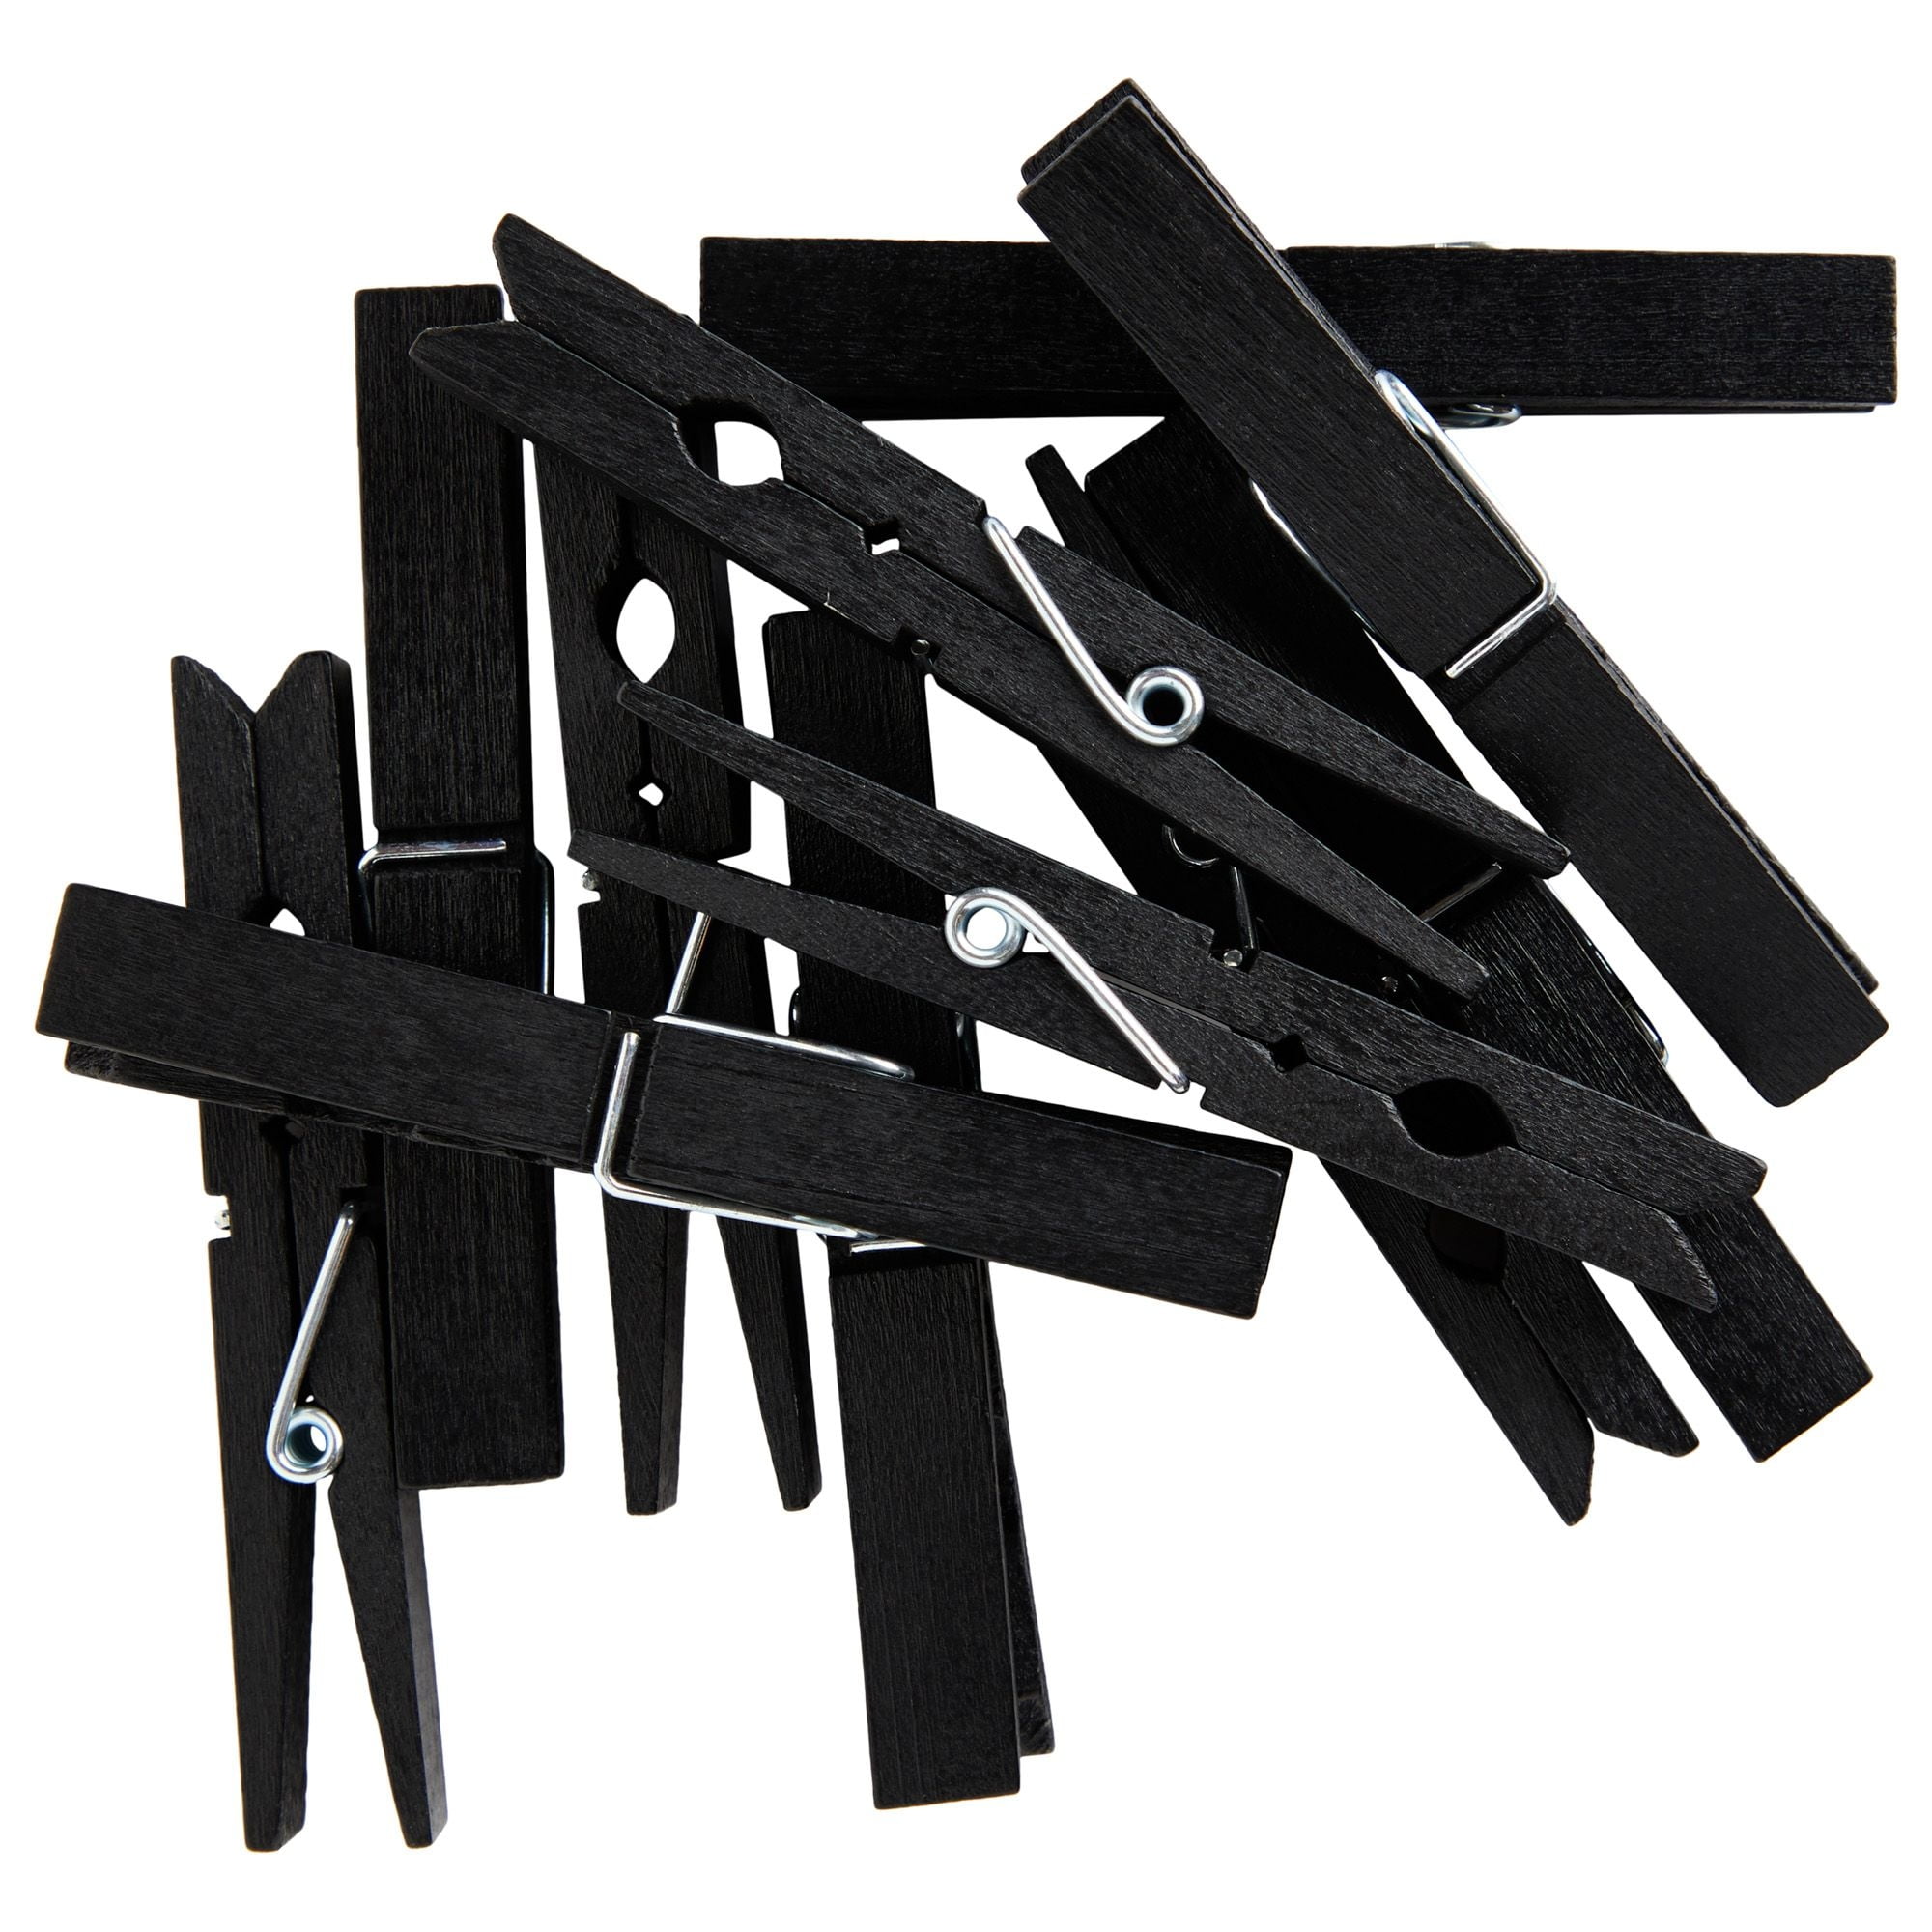 Tecbeauty 100pcs Clothes Pins Wooden Clothespins 3inch Heavy Duty Wood Clips for Hanging Clothes Pictures Outdoor